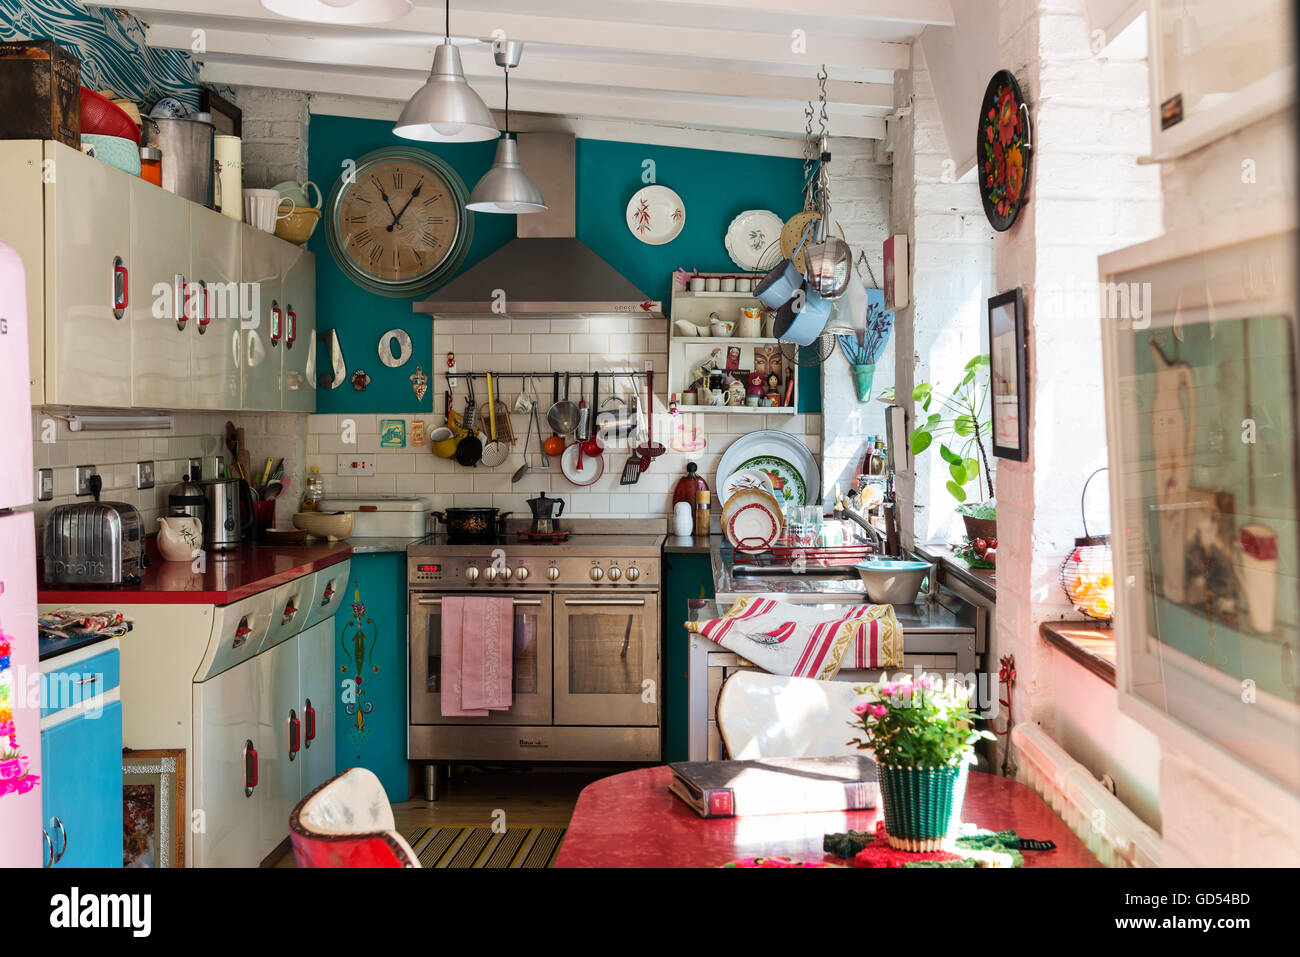 Eclectic kitchen with 1950's English Rose units and St Giles Blue by Farrow & Ball wall colour Stock Photo